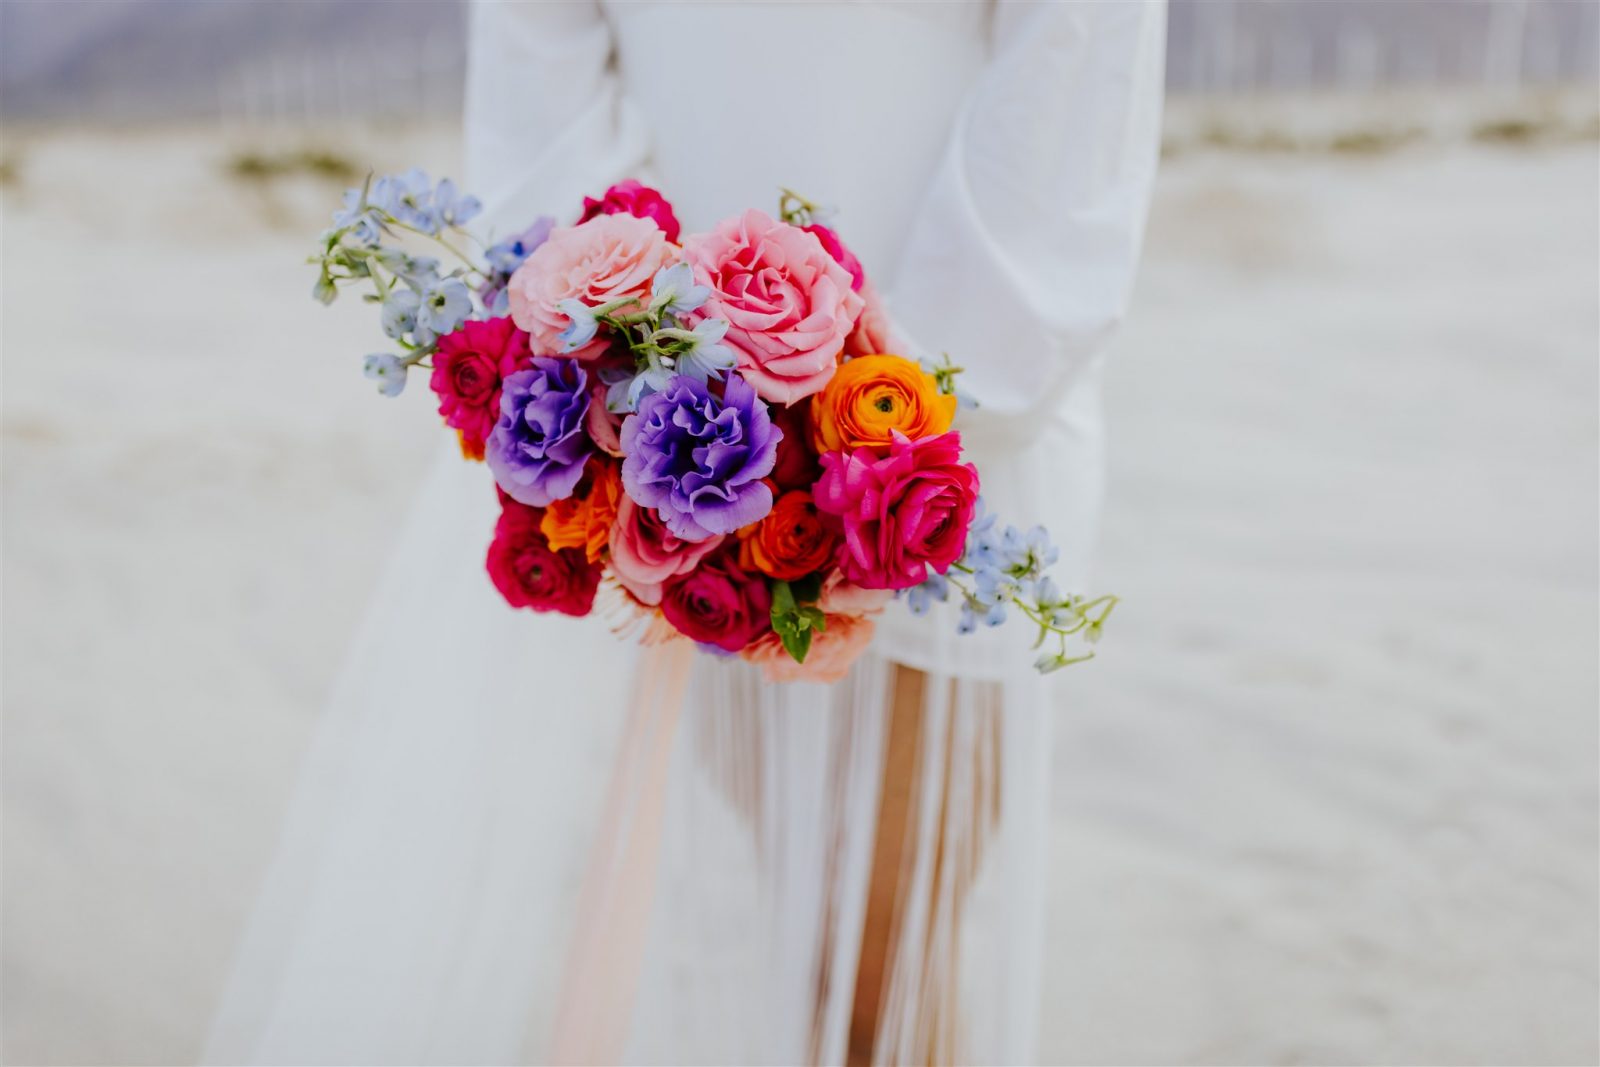 Best beaches for your Southern California elopement